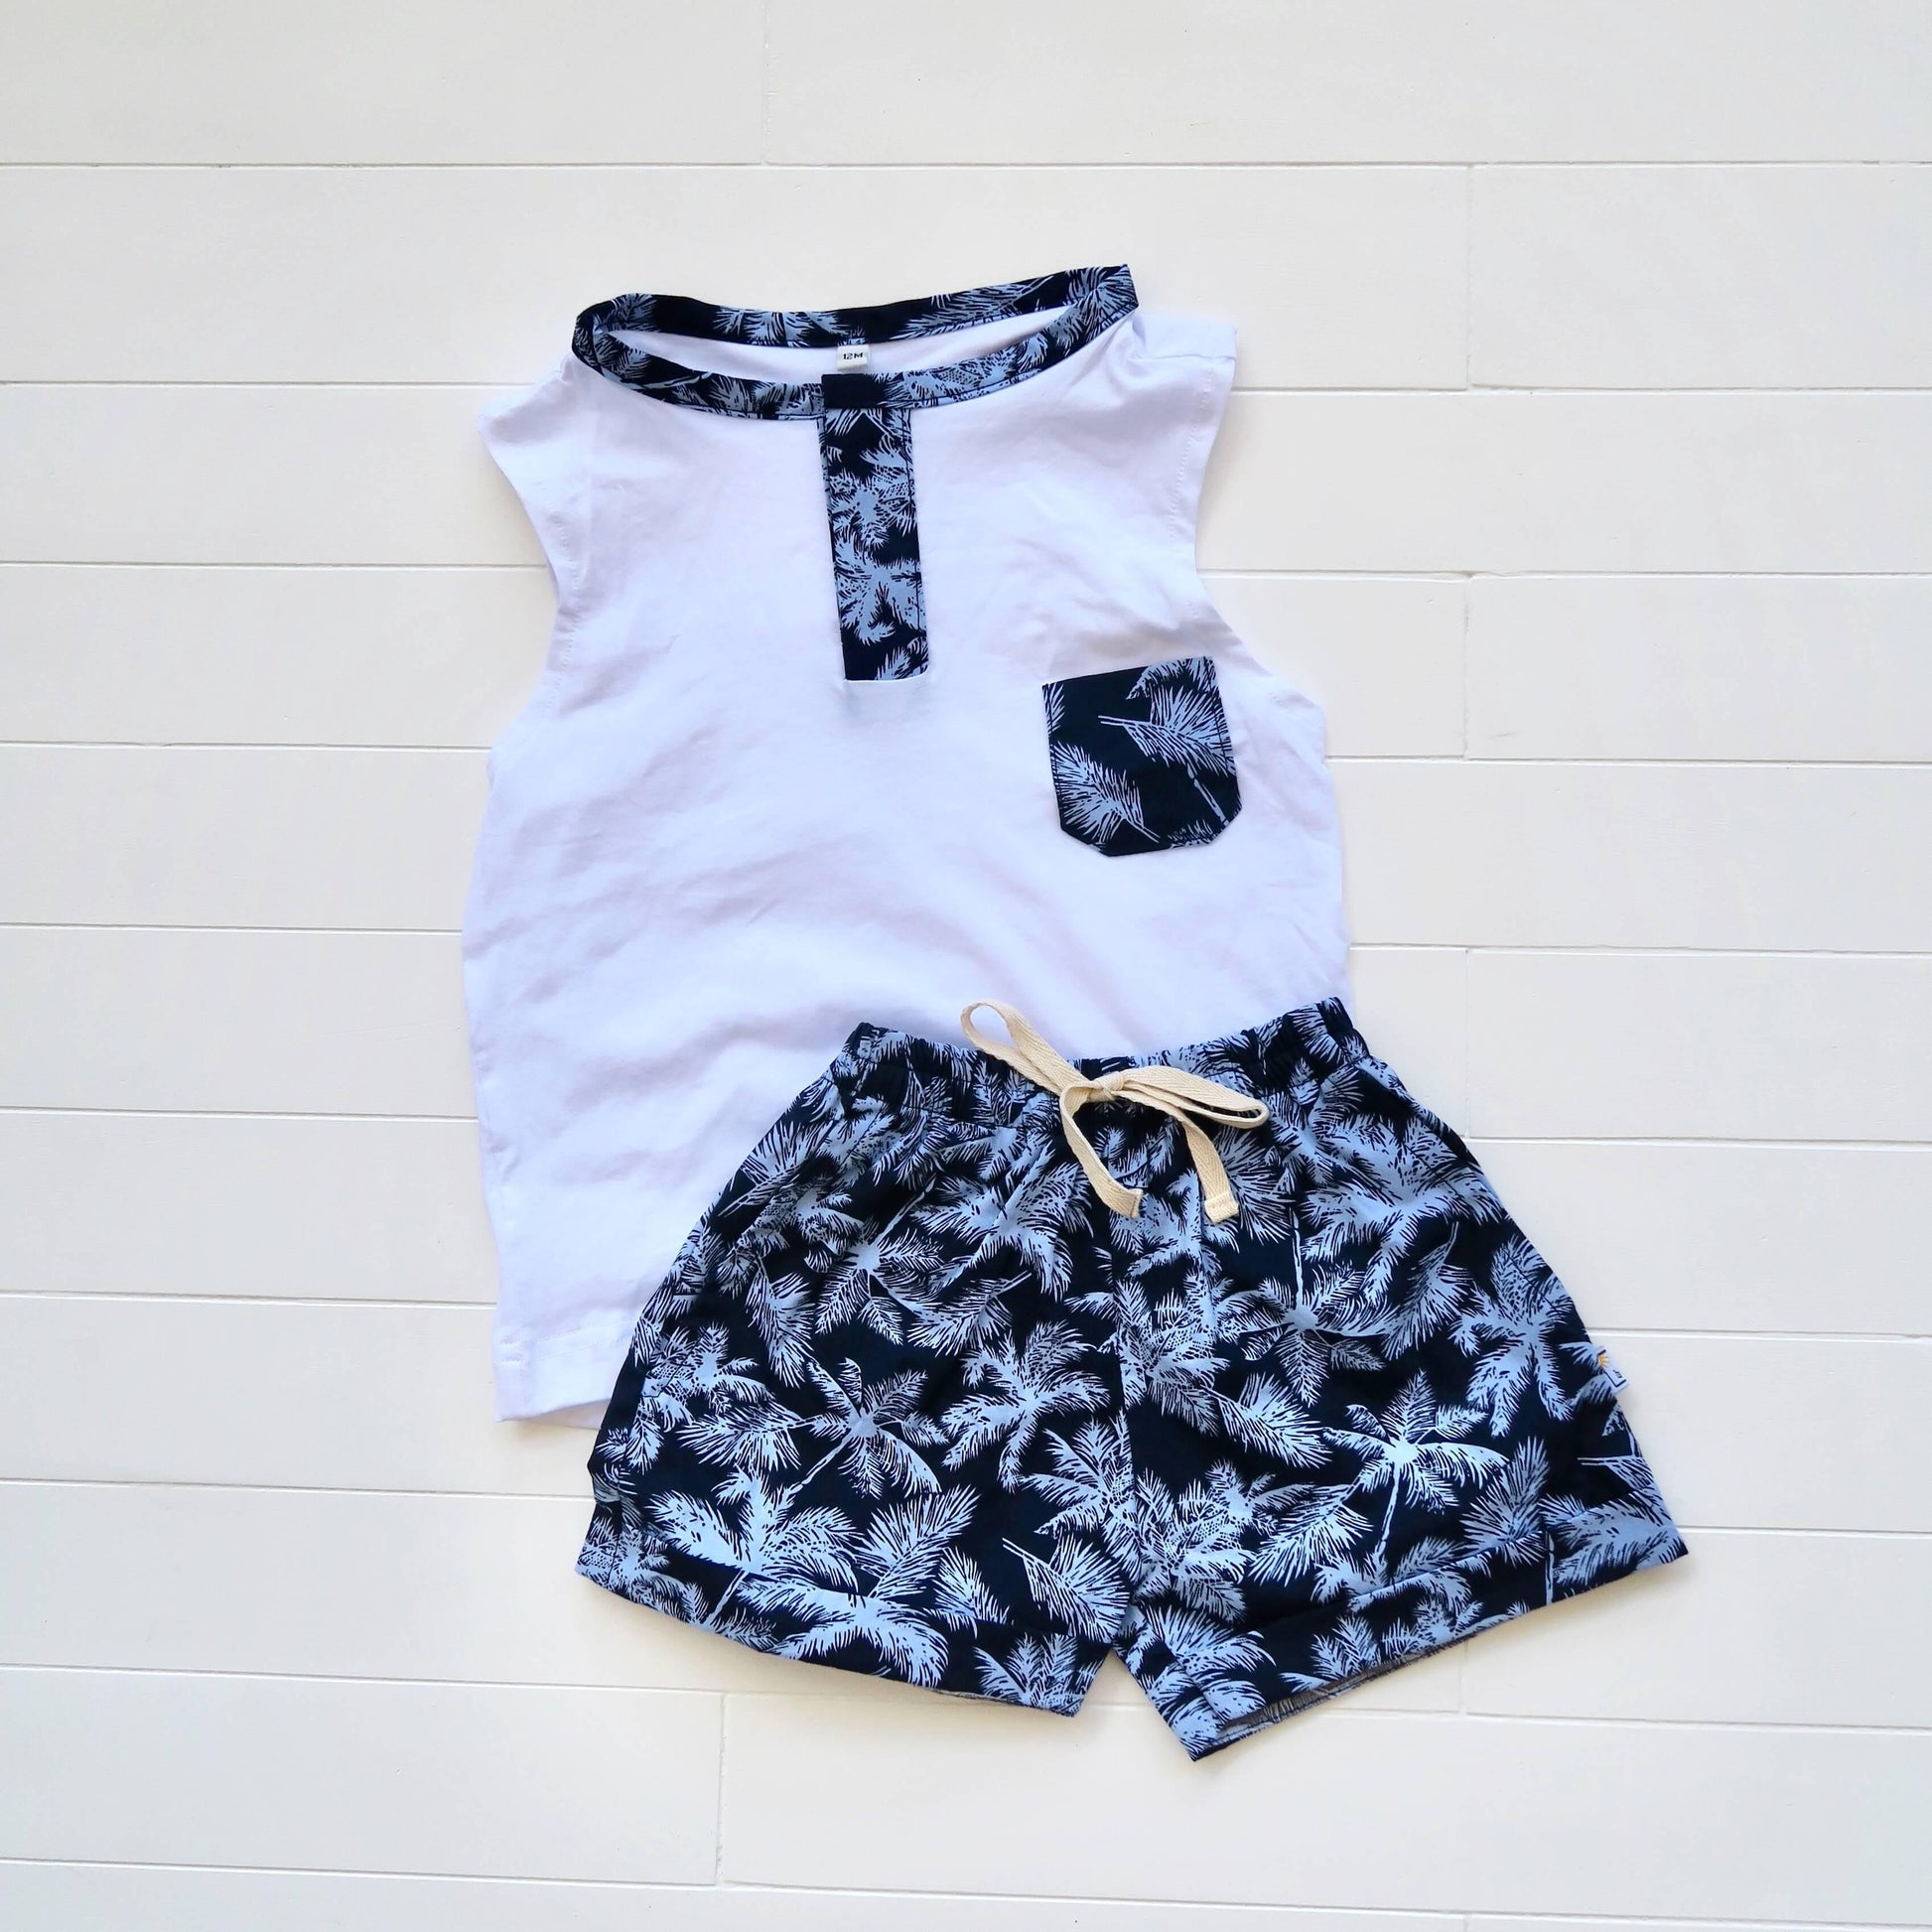 Caper Sleeveless Top & Shorts in Blue Coconut Trees and White Stretch - Lil' Tati